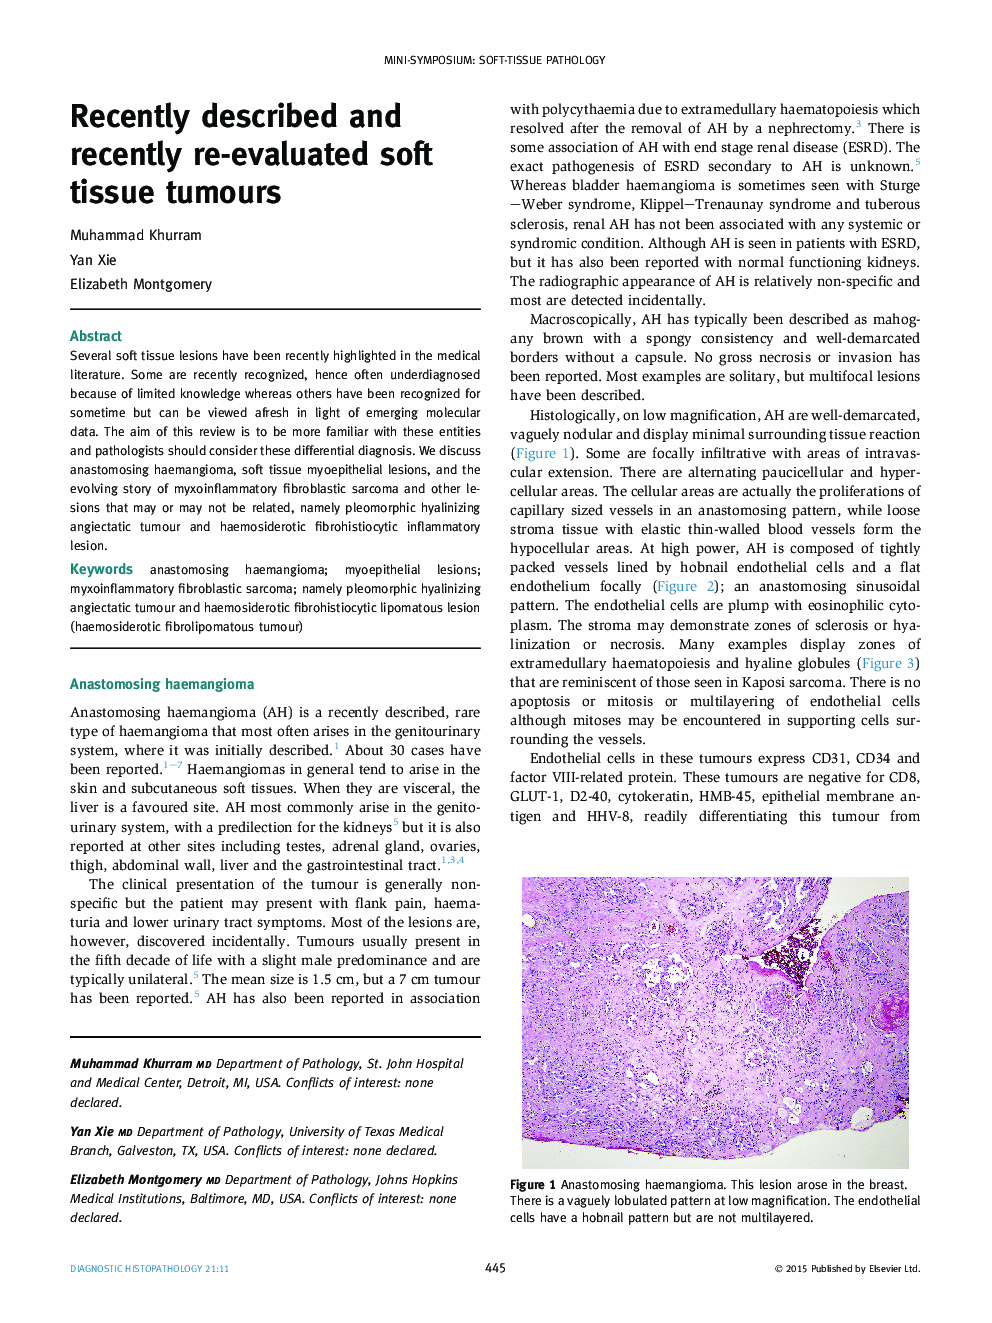 Recently described and recently re-evaluated soft tissue tumours